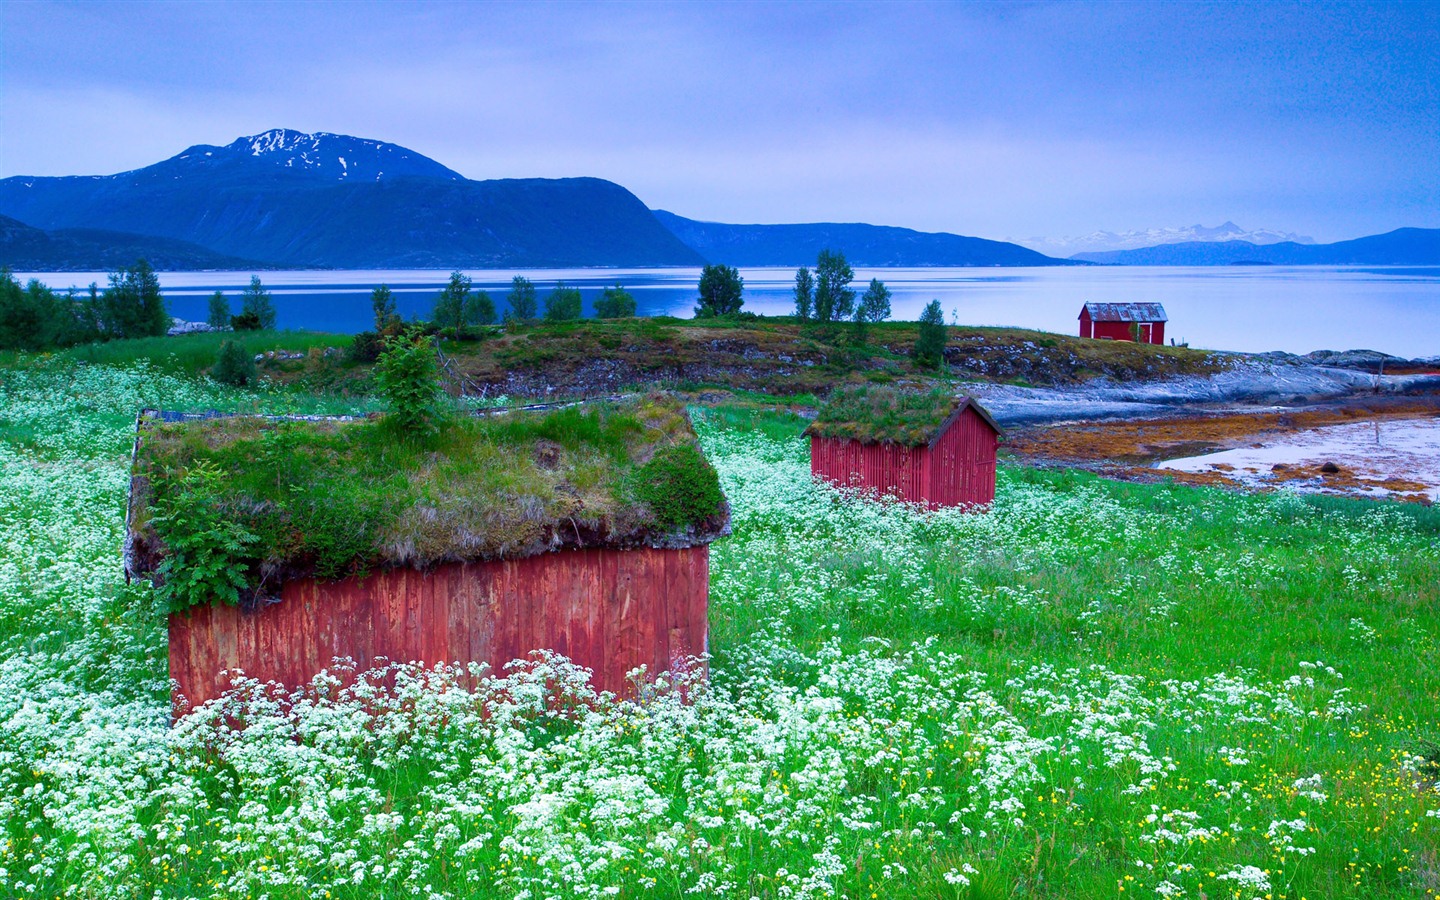 Windows 7 Wallpapers: Nordic Landscapes #3 - 1440x900